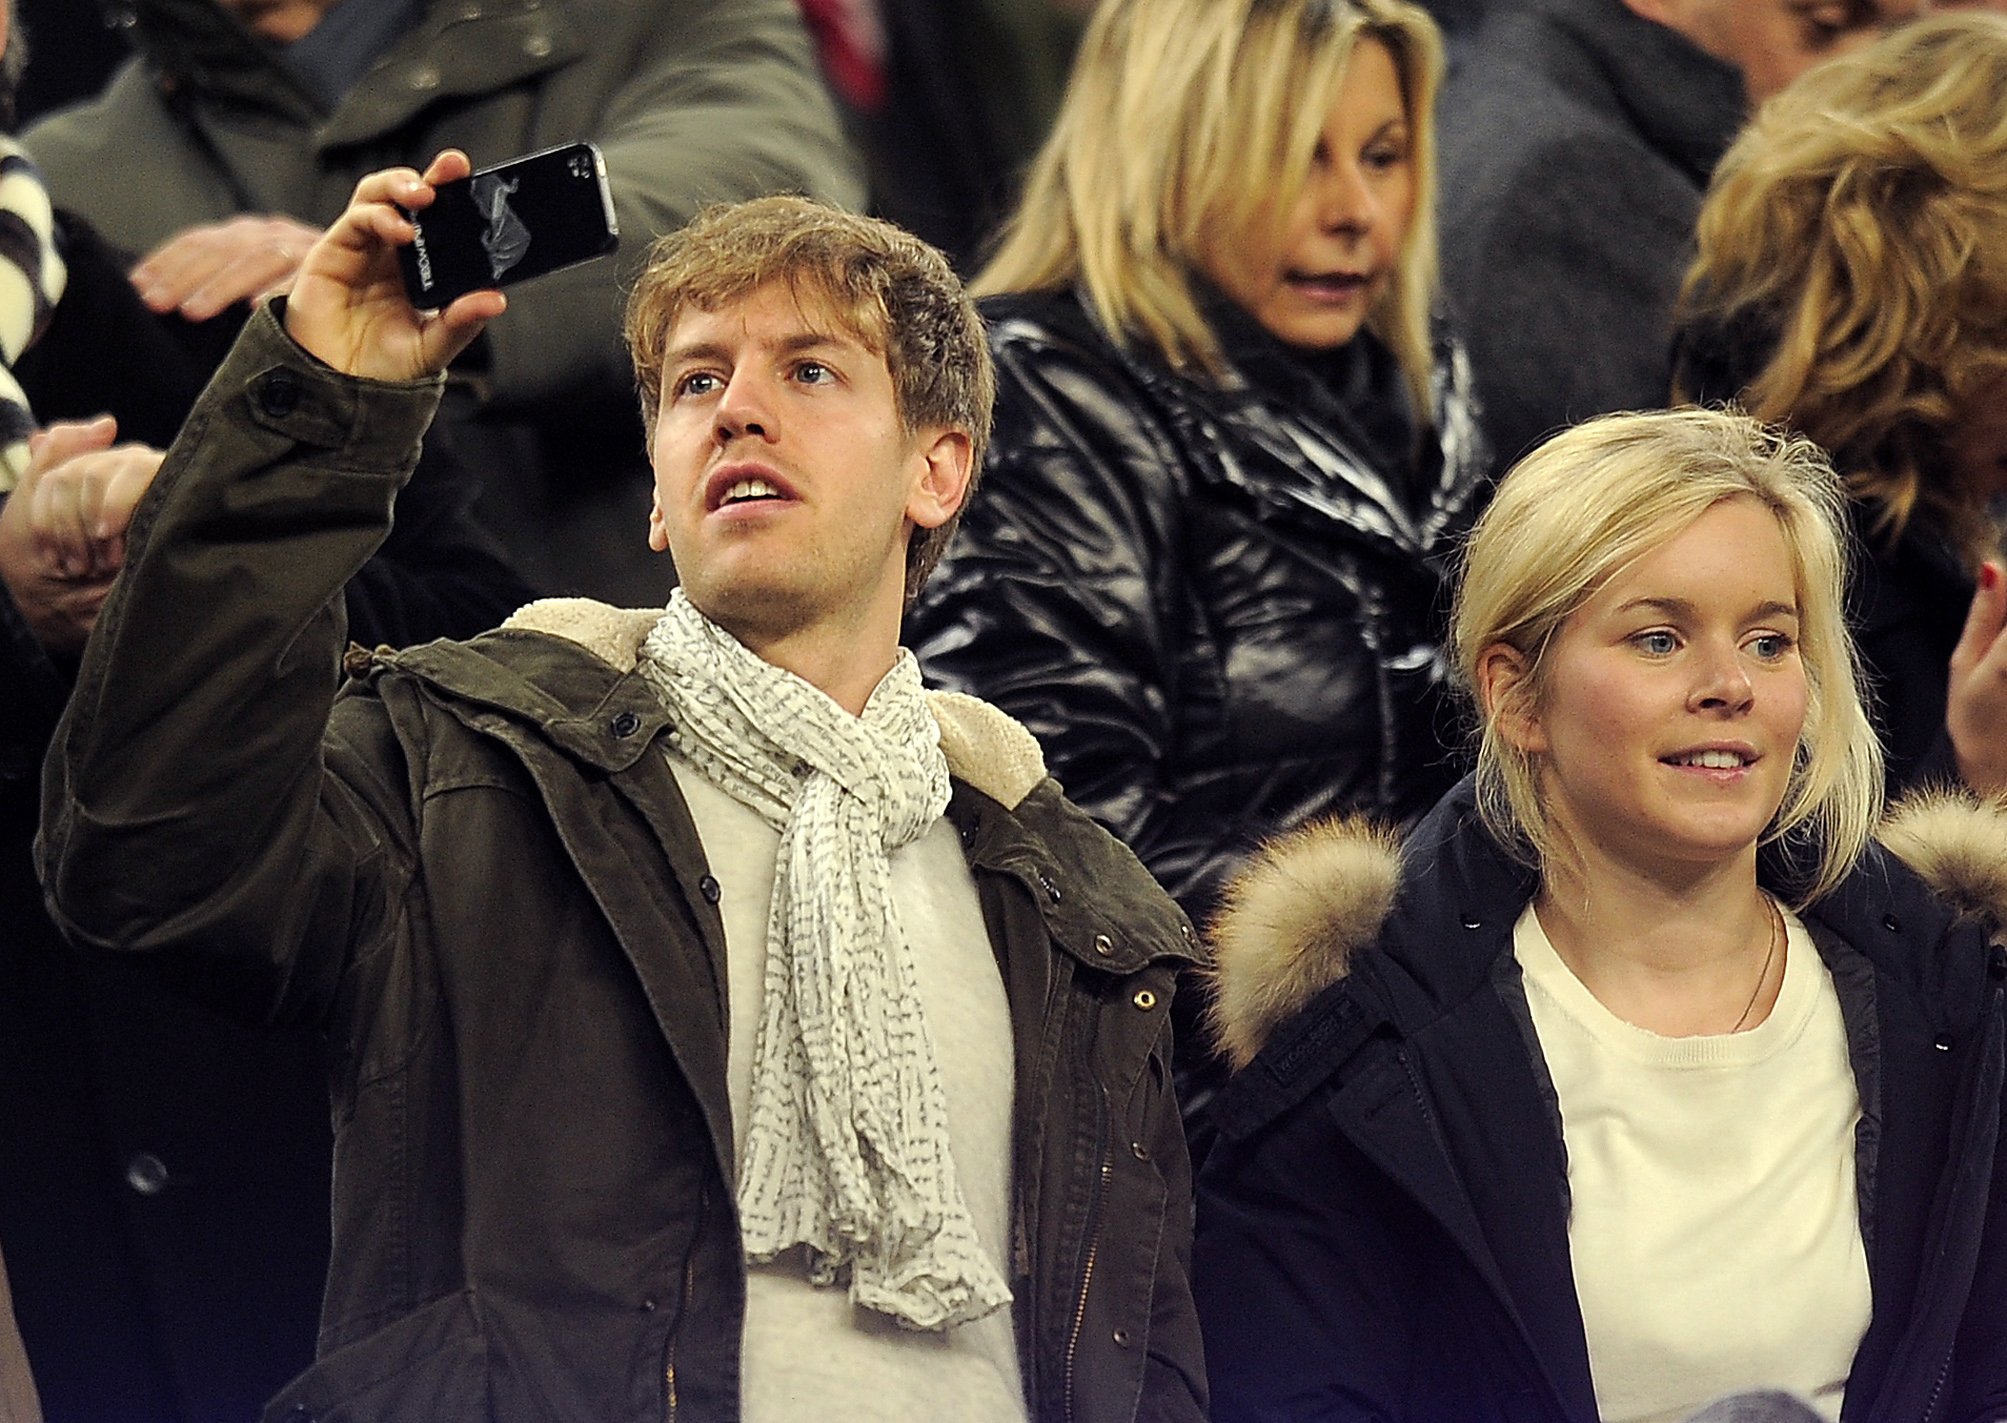 Sebastian Vettel and Hanna Prater during the Spanish league football match between FC Barcelona and Valencia CF at the Camp Nou stadium on February 19, 2012, in Barcelona, Spain. | Source: Getty Images